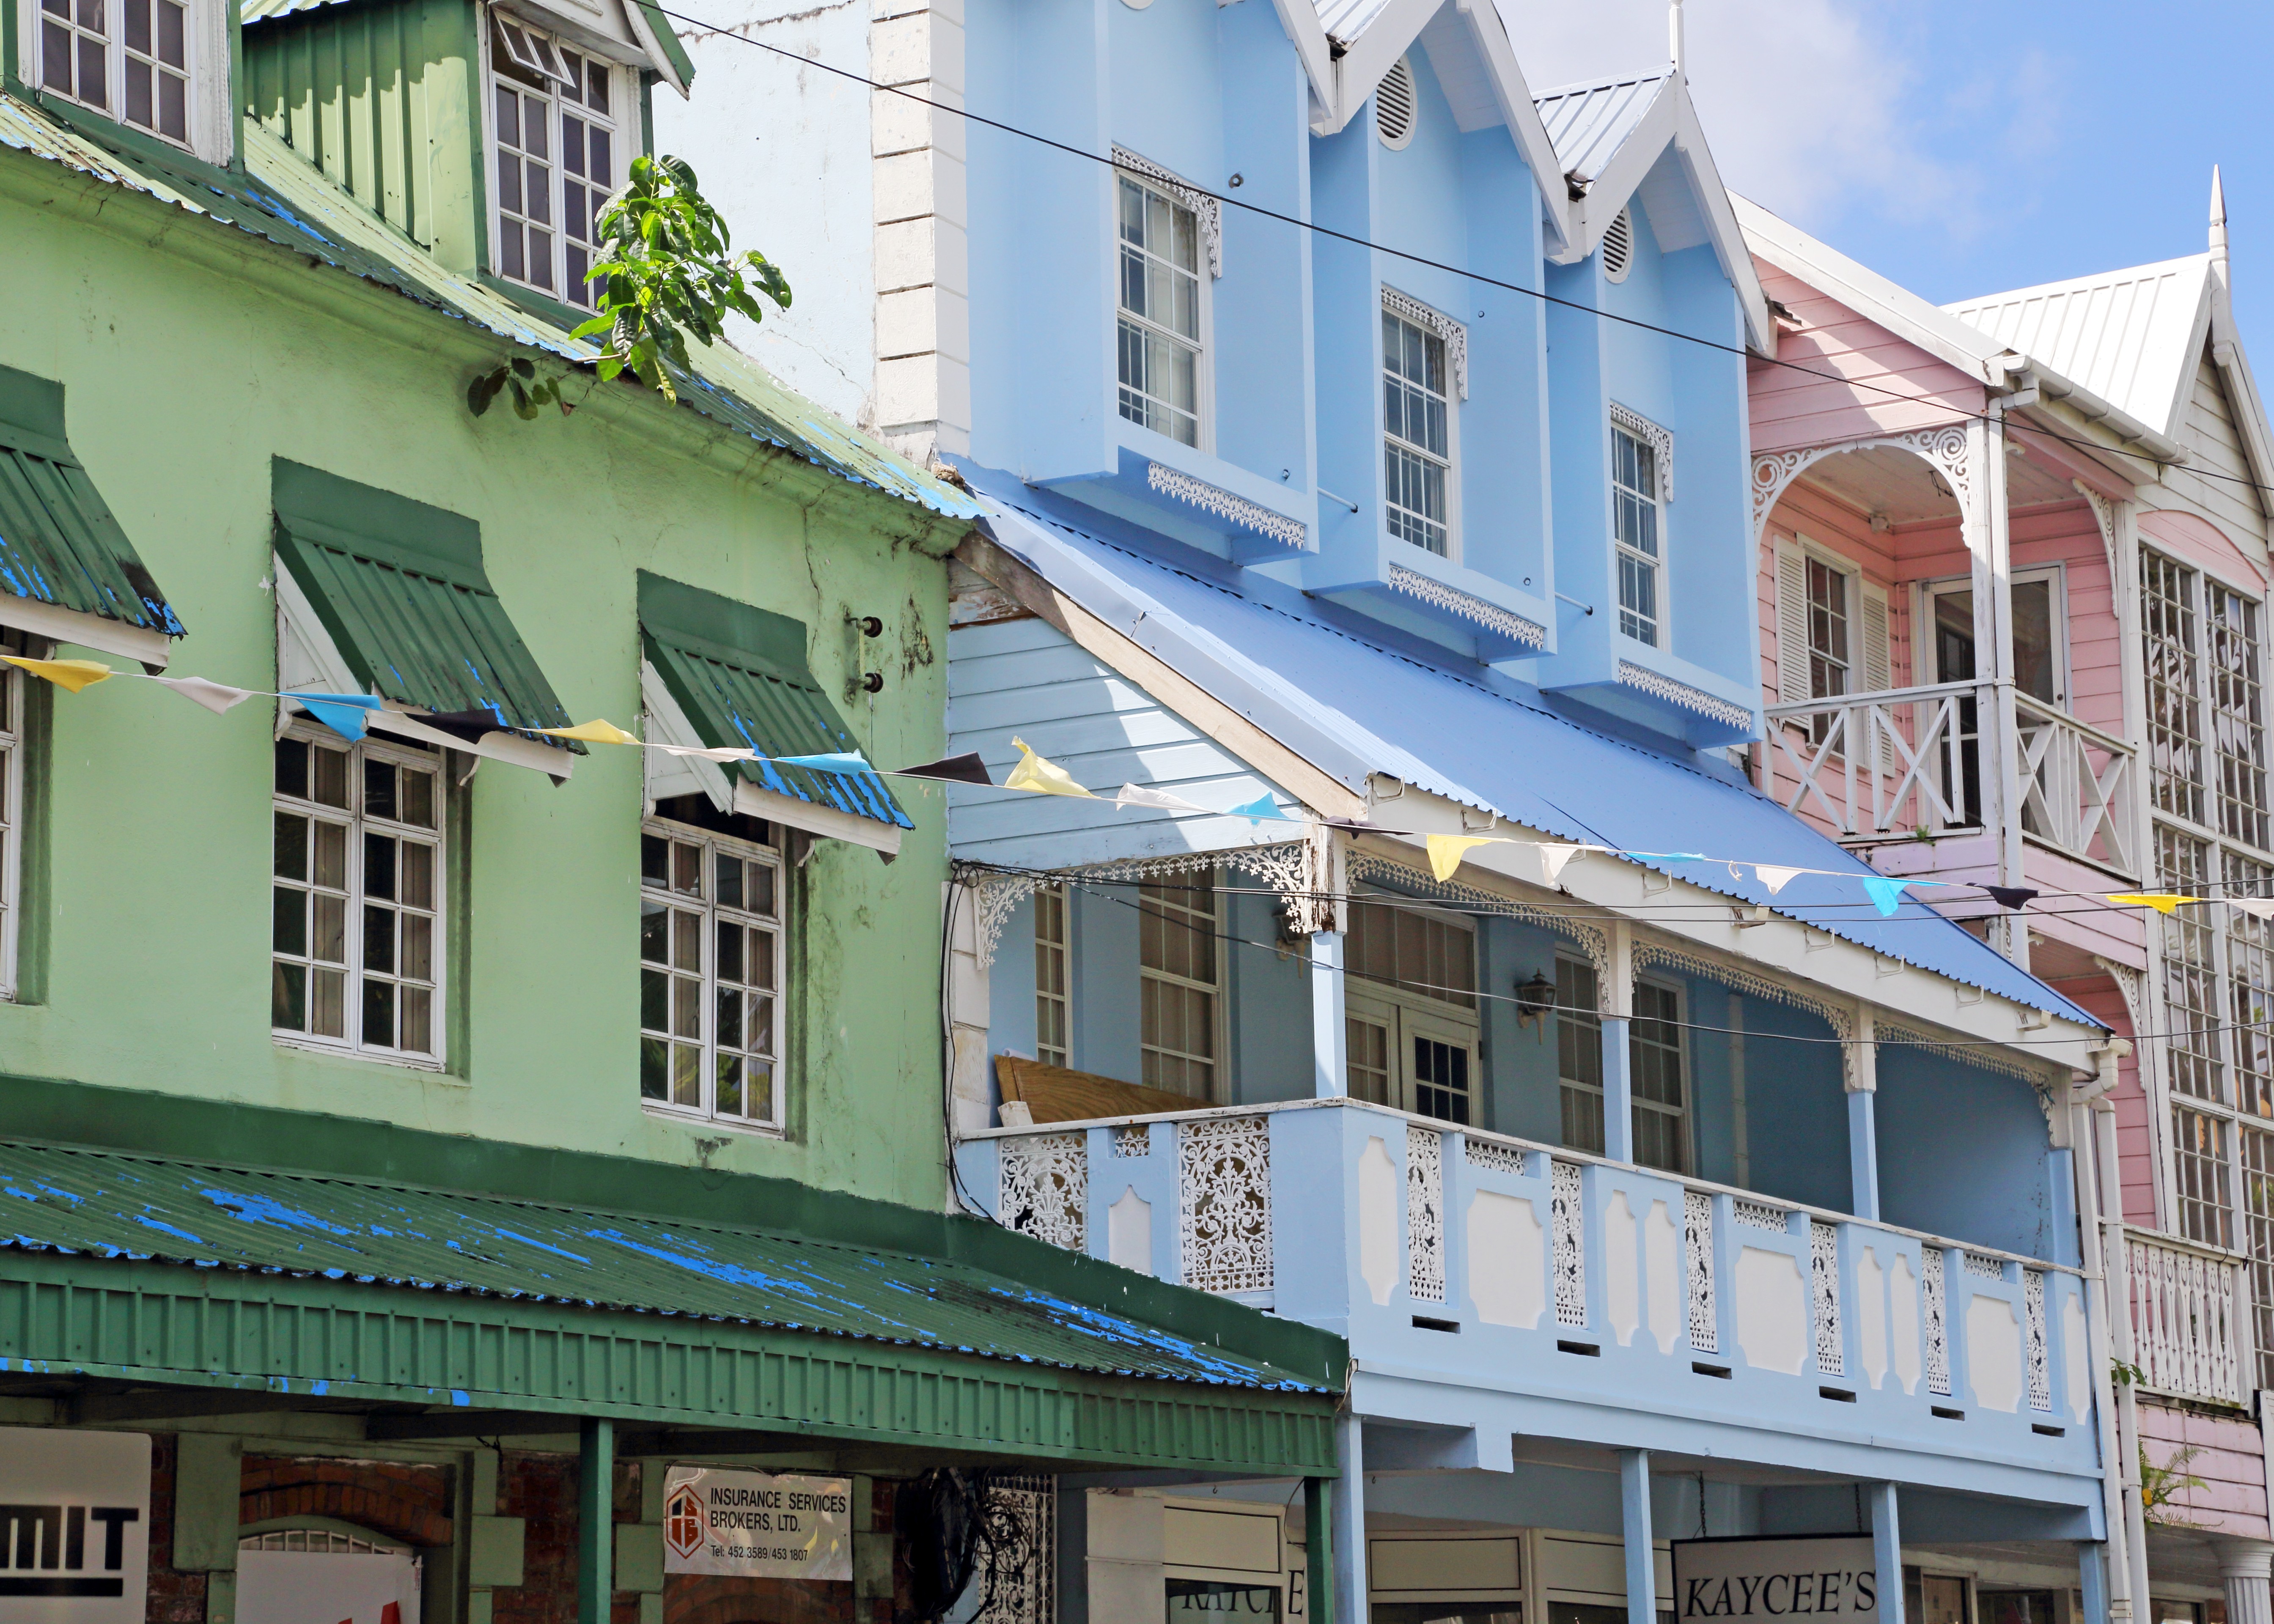 Traditional buildings in Castries, the capital of the Caribbean sovereign island of Saint Lucia, which launched its Citizenship by Investment programme in December 2015. Photo: Shutterstock